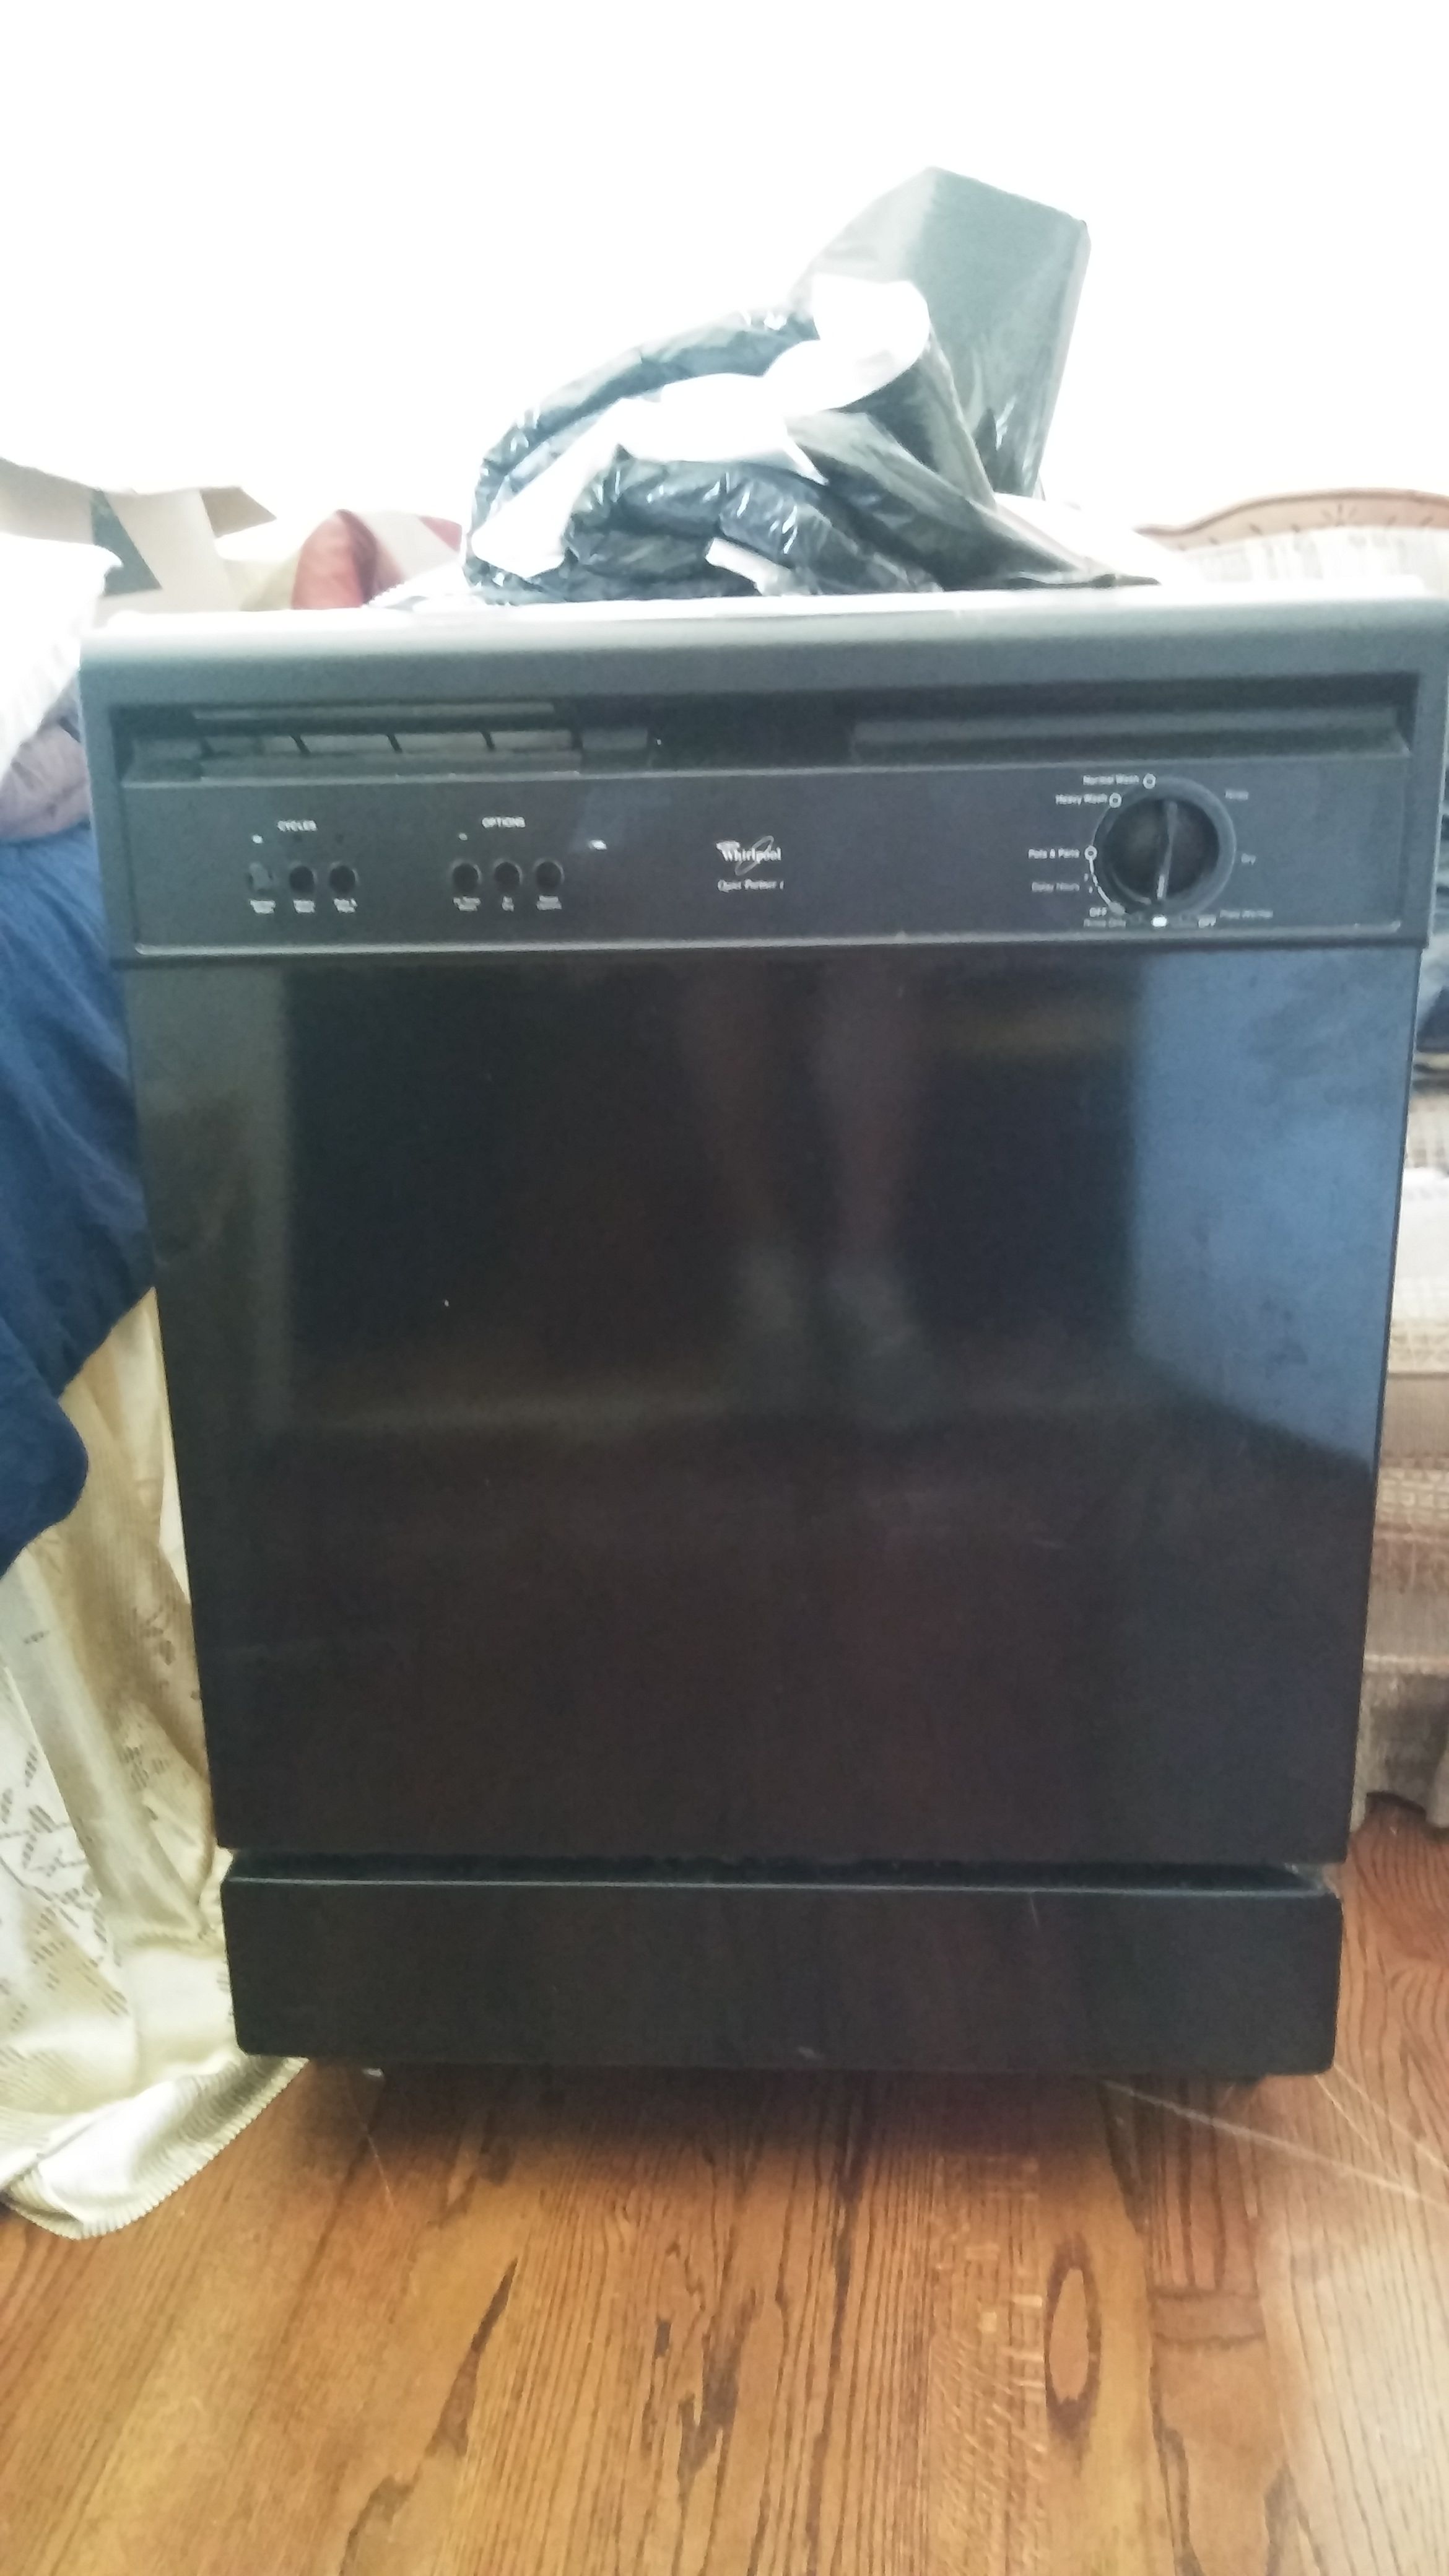 Whirlpool 3 cycle dish washer, with all the bells & whistles